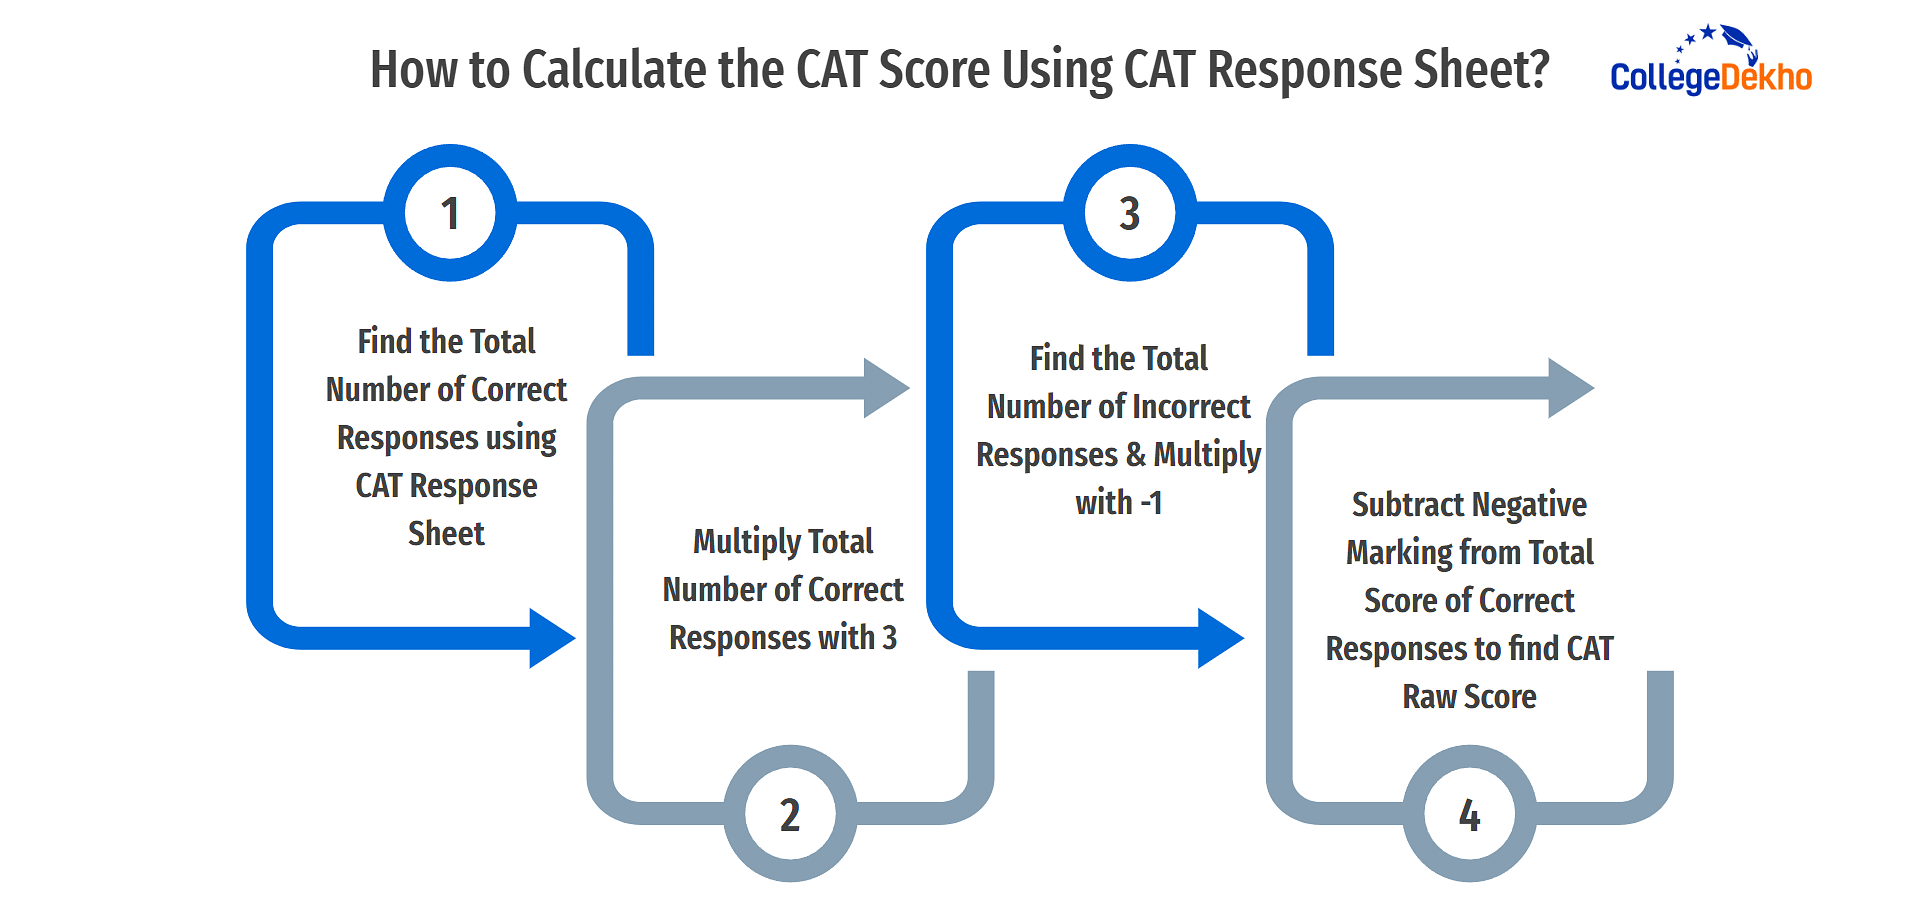 How to Calculate the CAT Score Using CAT Response Sheet